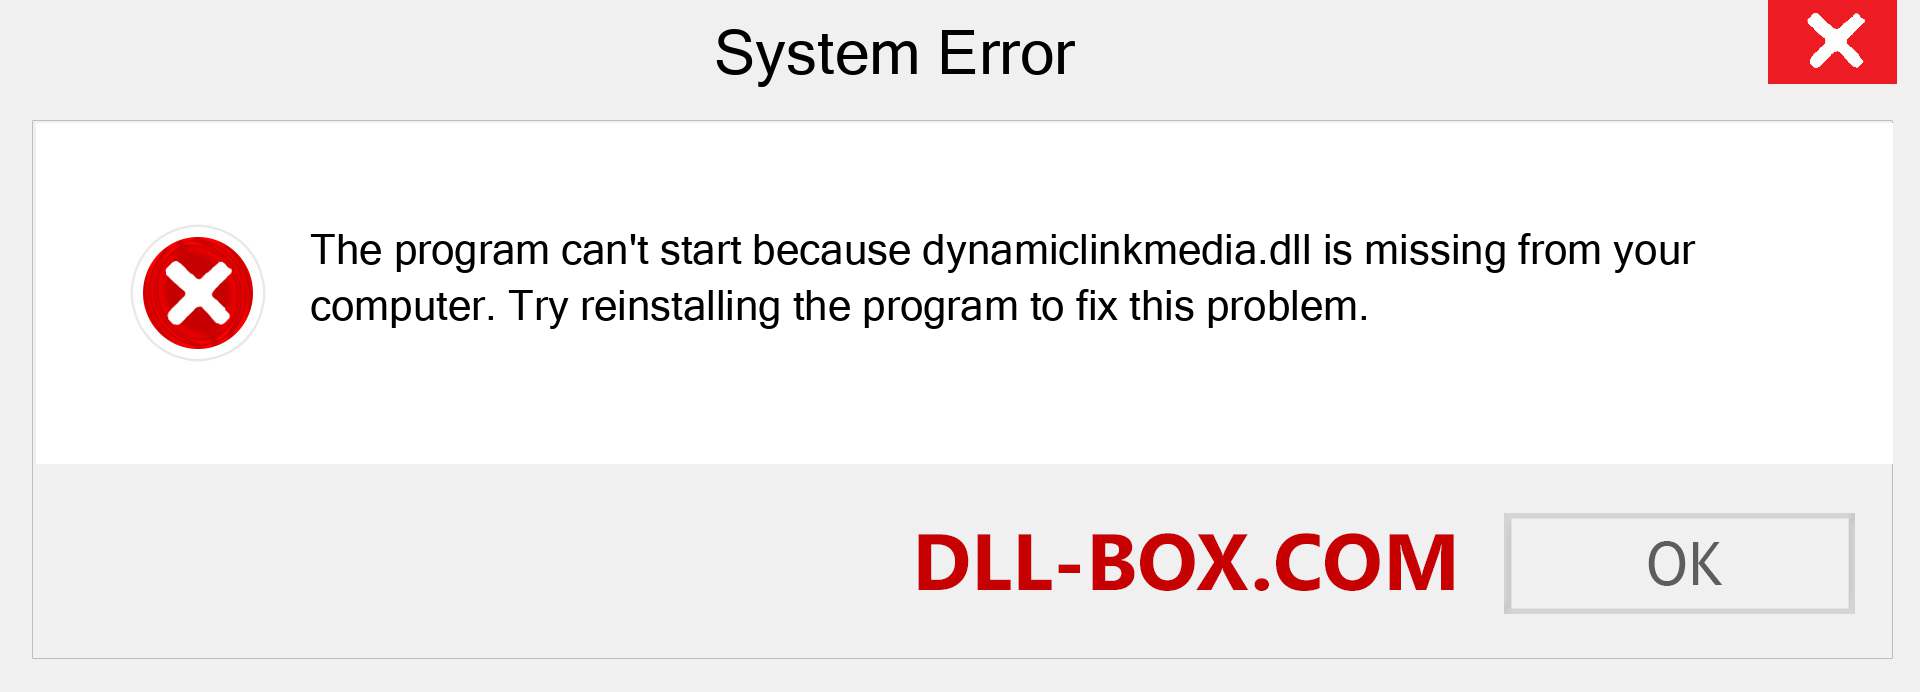  dynamiclinkmedia.dll file is missing?. Download for Windows 7, 8, 10 - Fix  dynamiclinkmedia dll Missing Error on Windows, photos, images